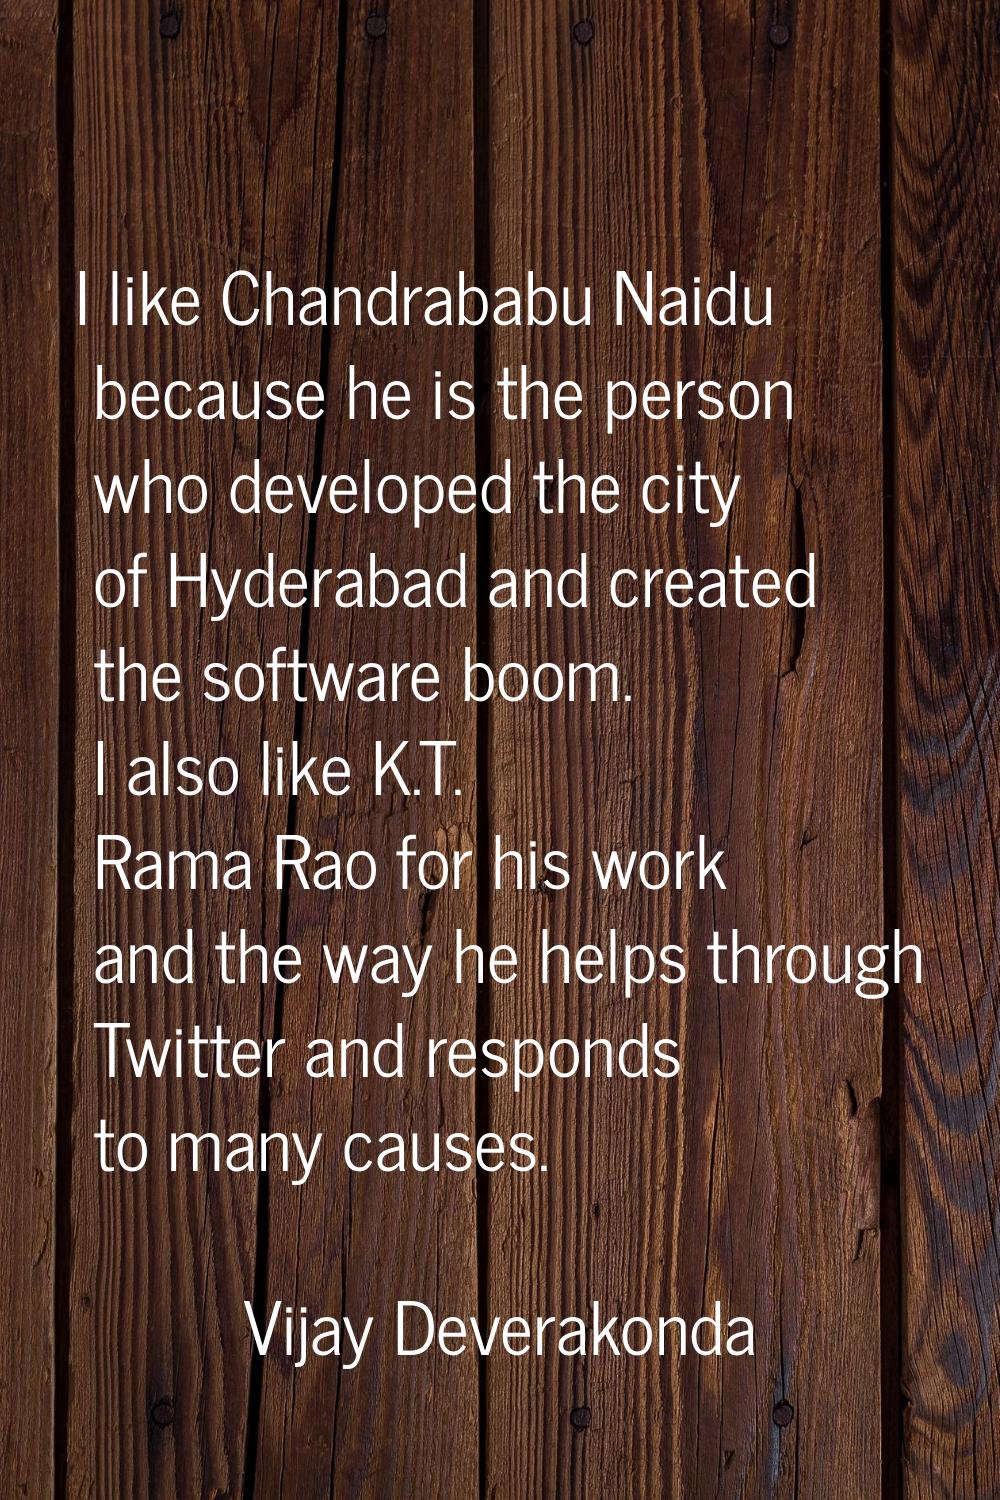 I like Chandrababu Naidu because he is the person who developed the city of Hyderabad and created t